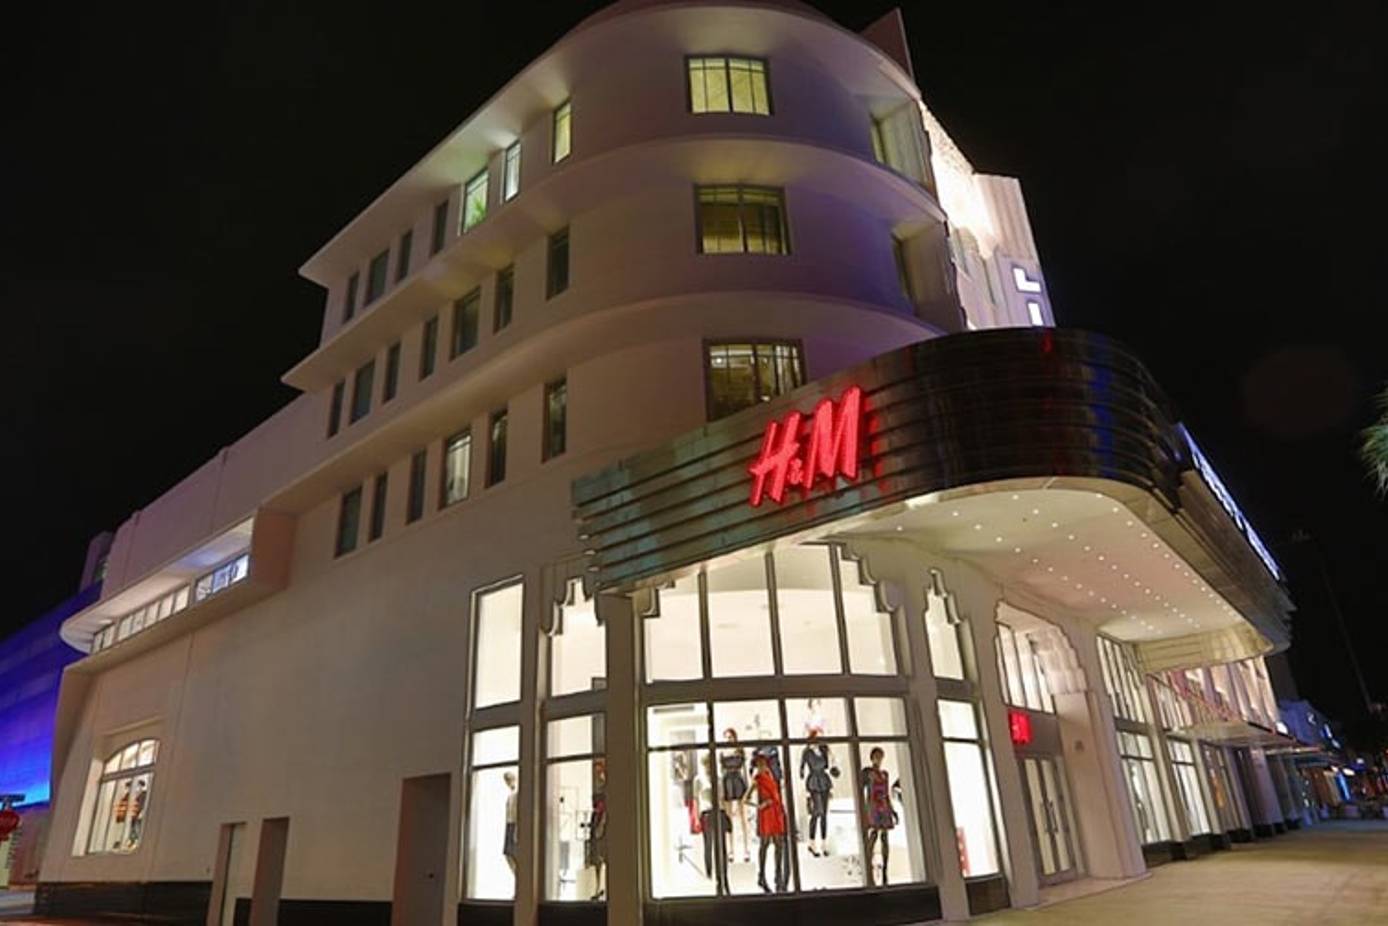 H&M's new CEO Helmersson gets tough with plan to eliminate 5% of stores